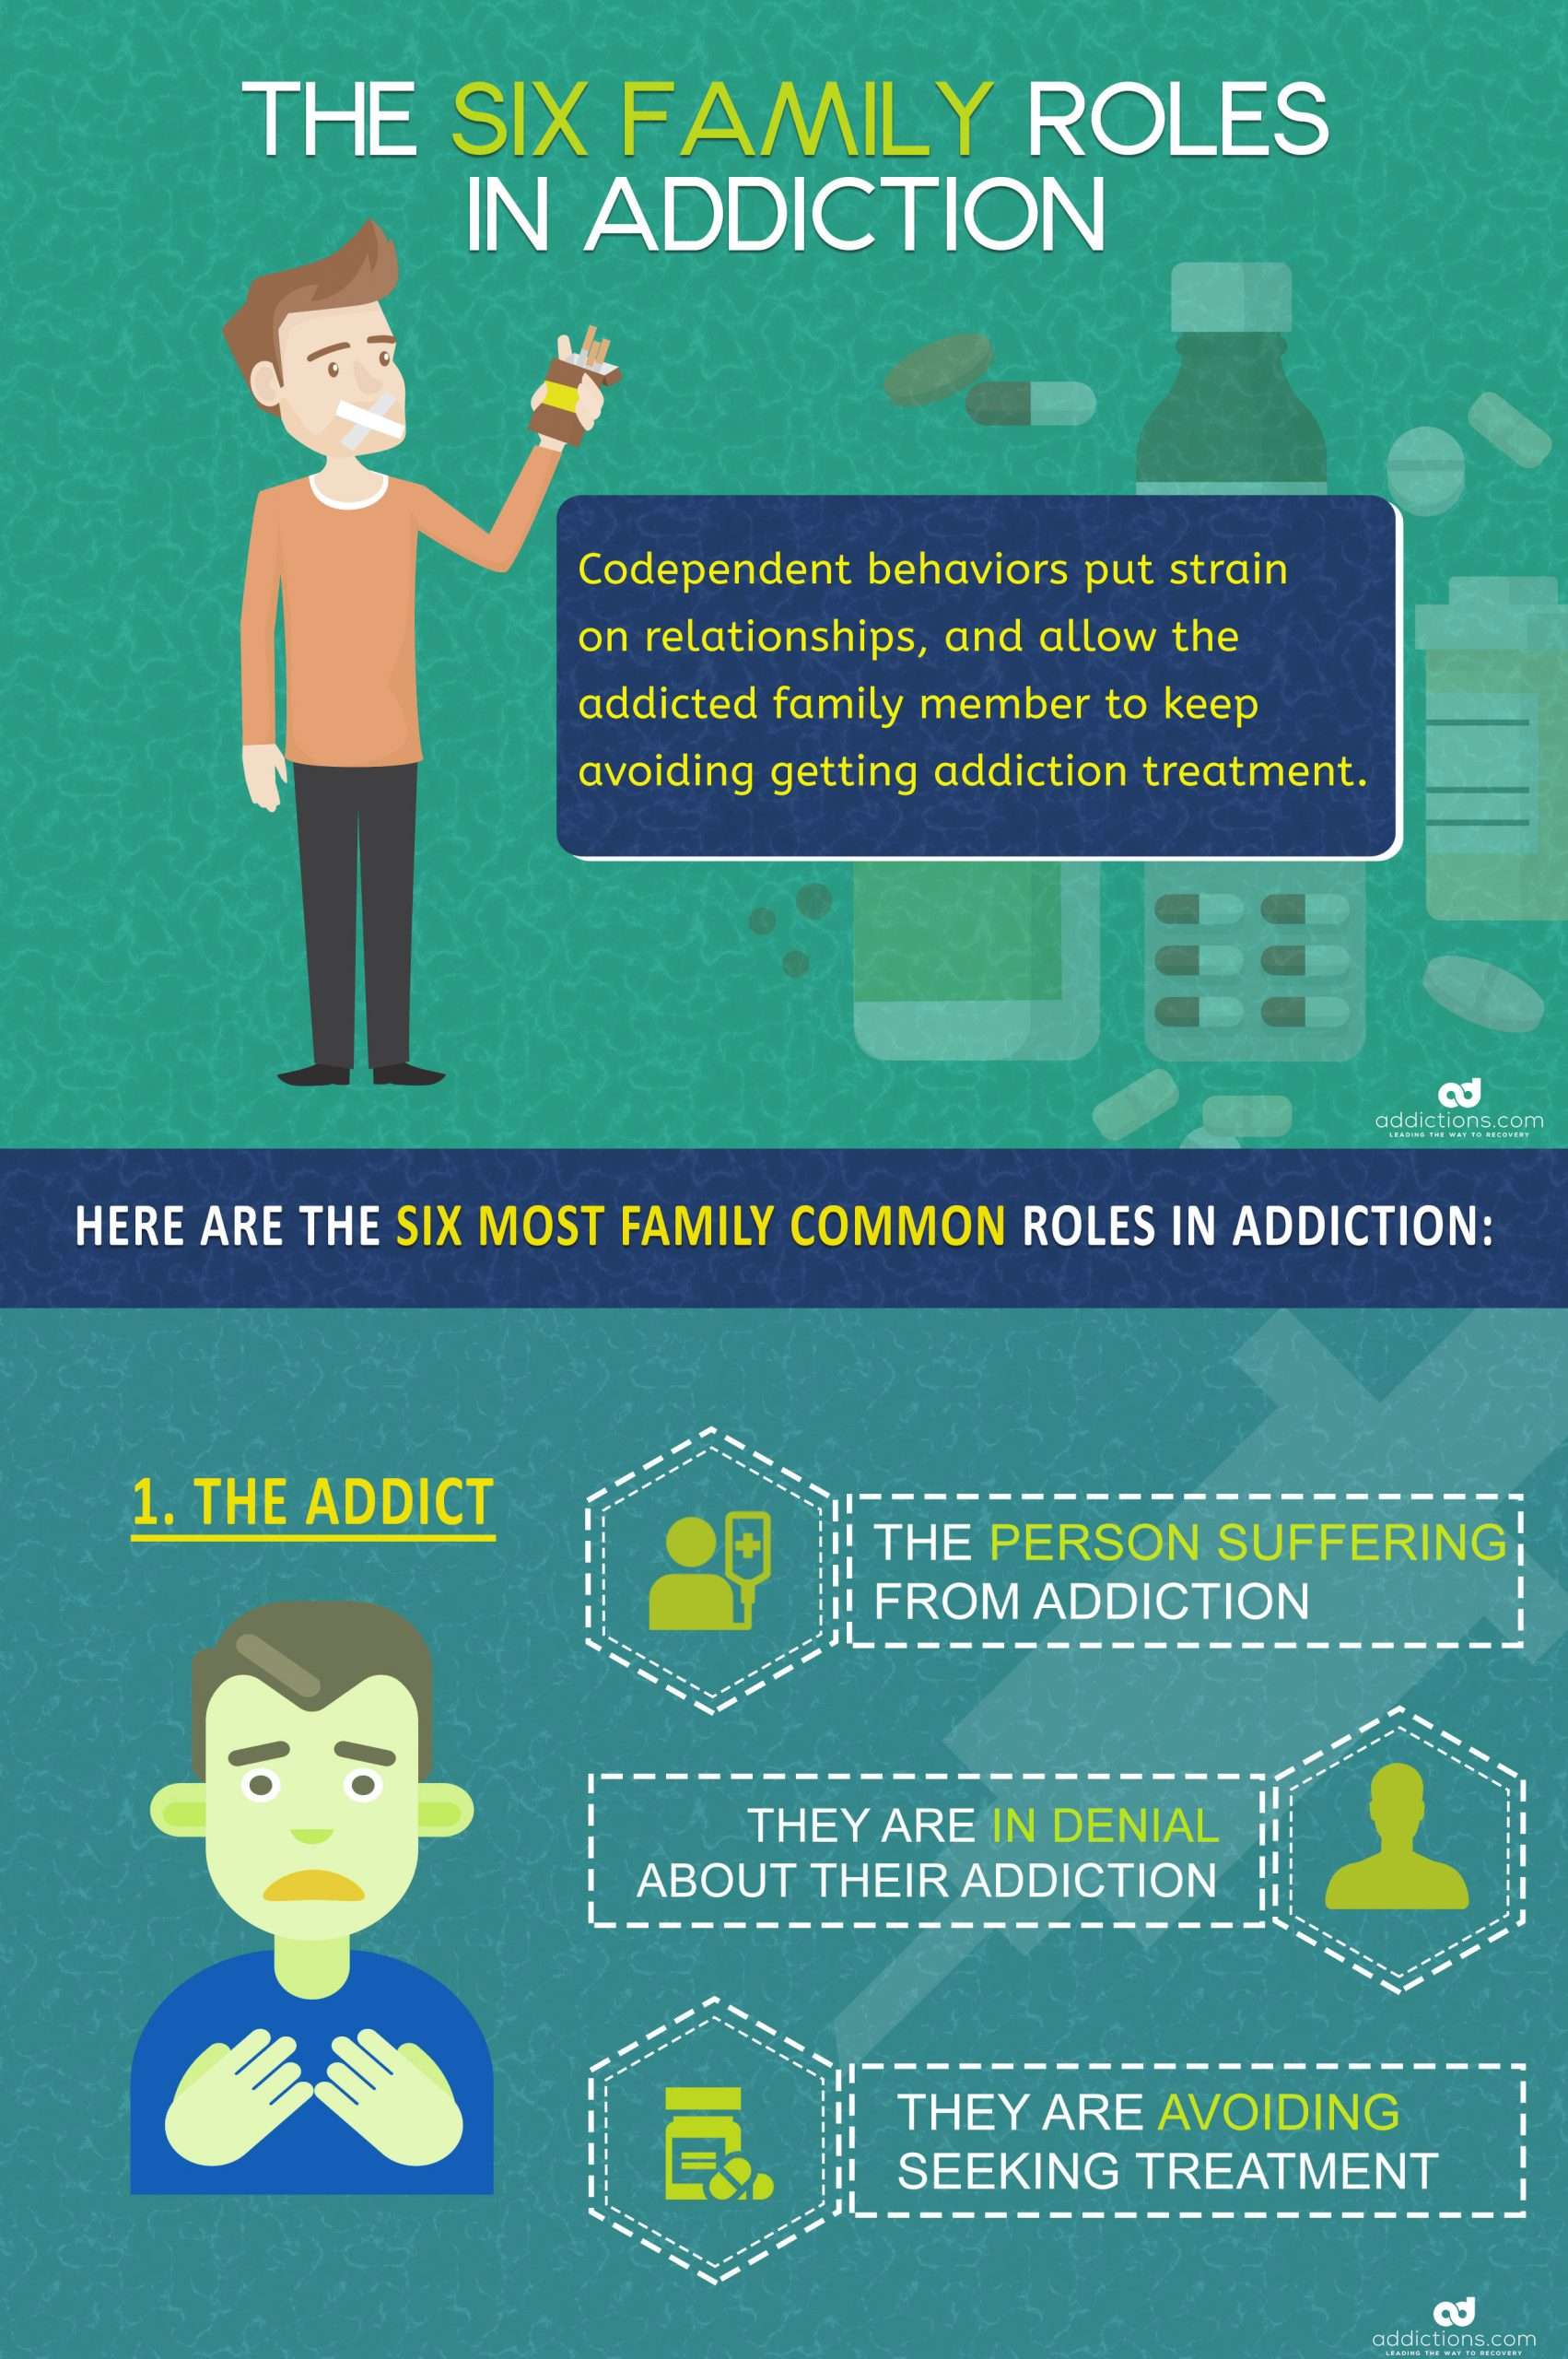 Take Warning of The 6 Most Common Family Roles in Addiction